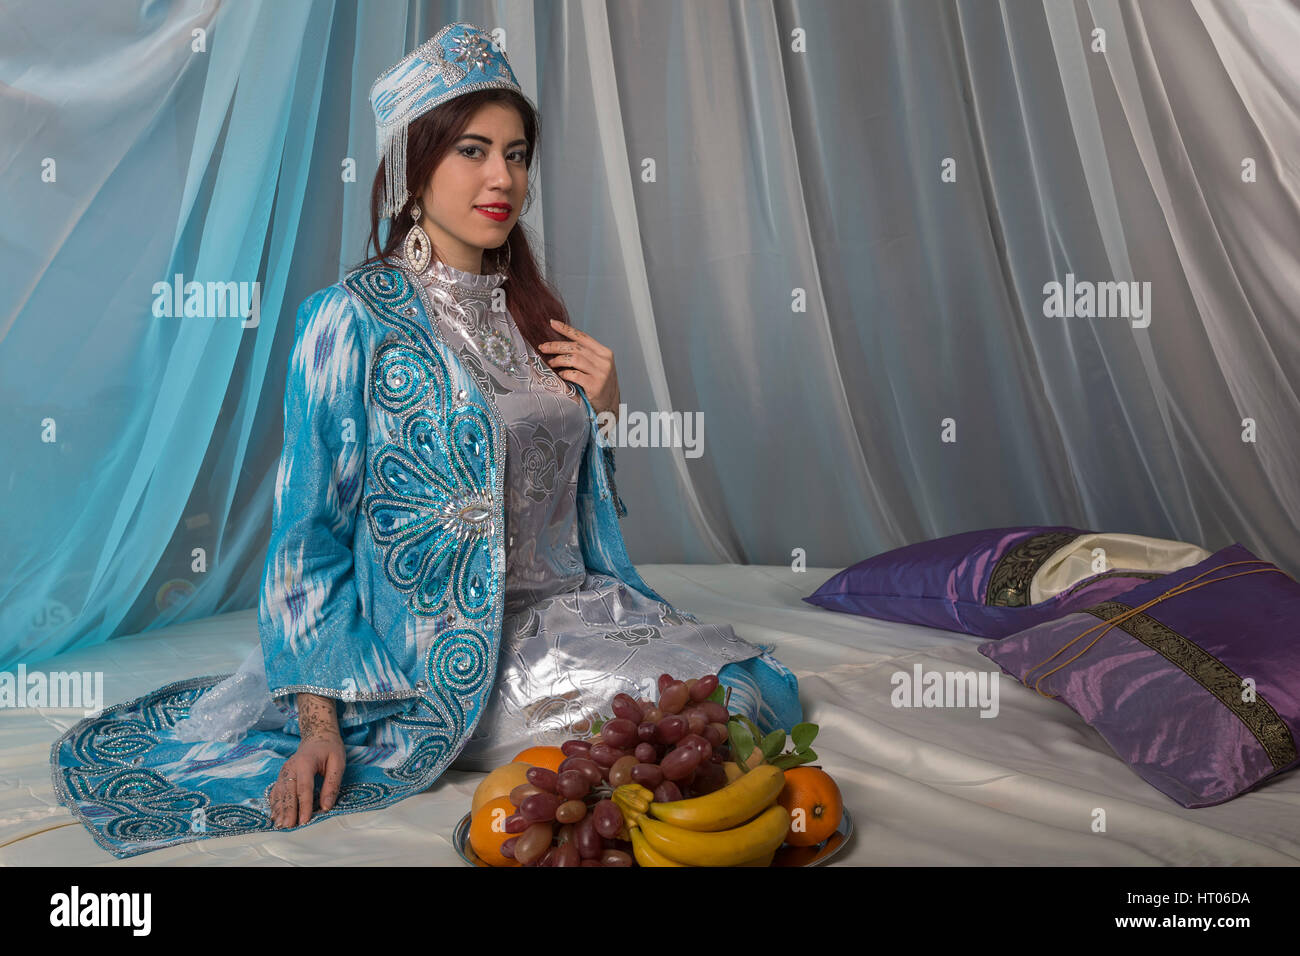 East girl in the bedroom. Stock Photo